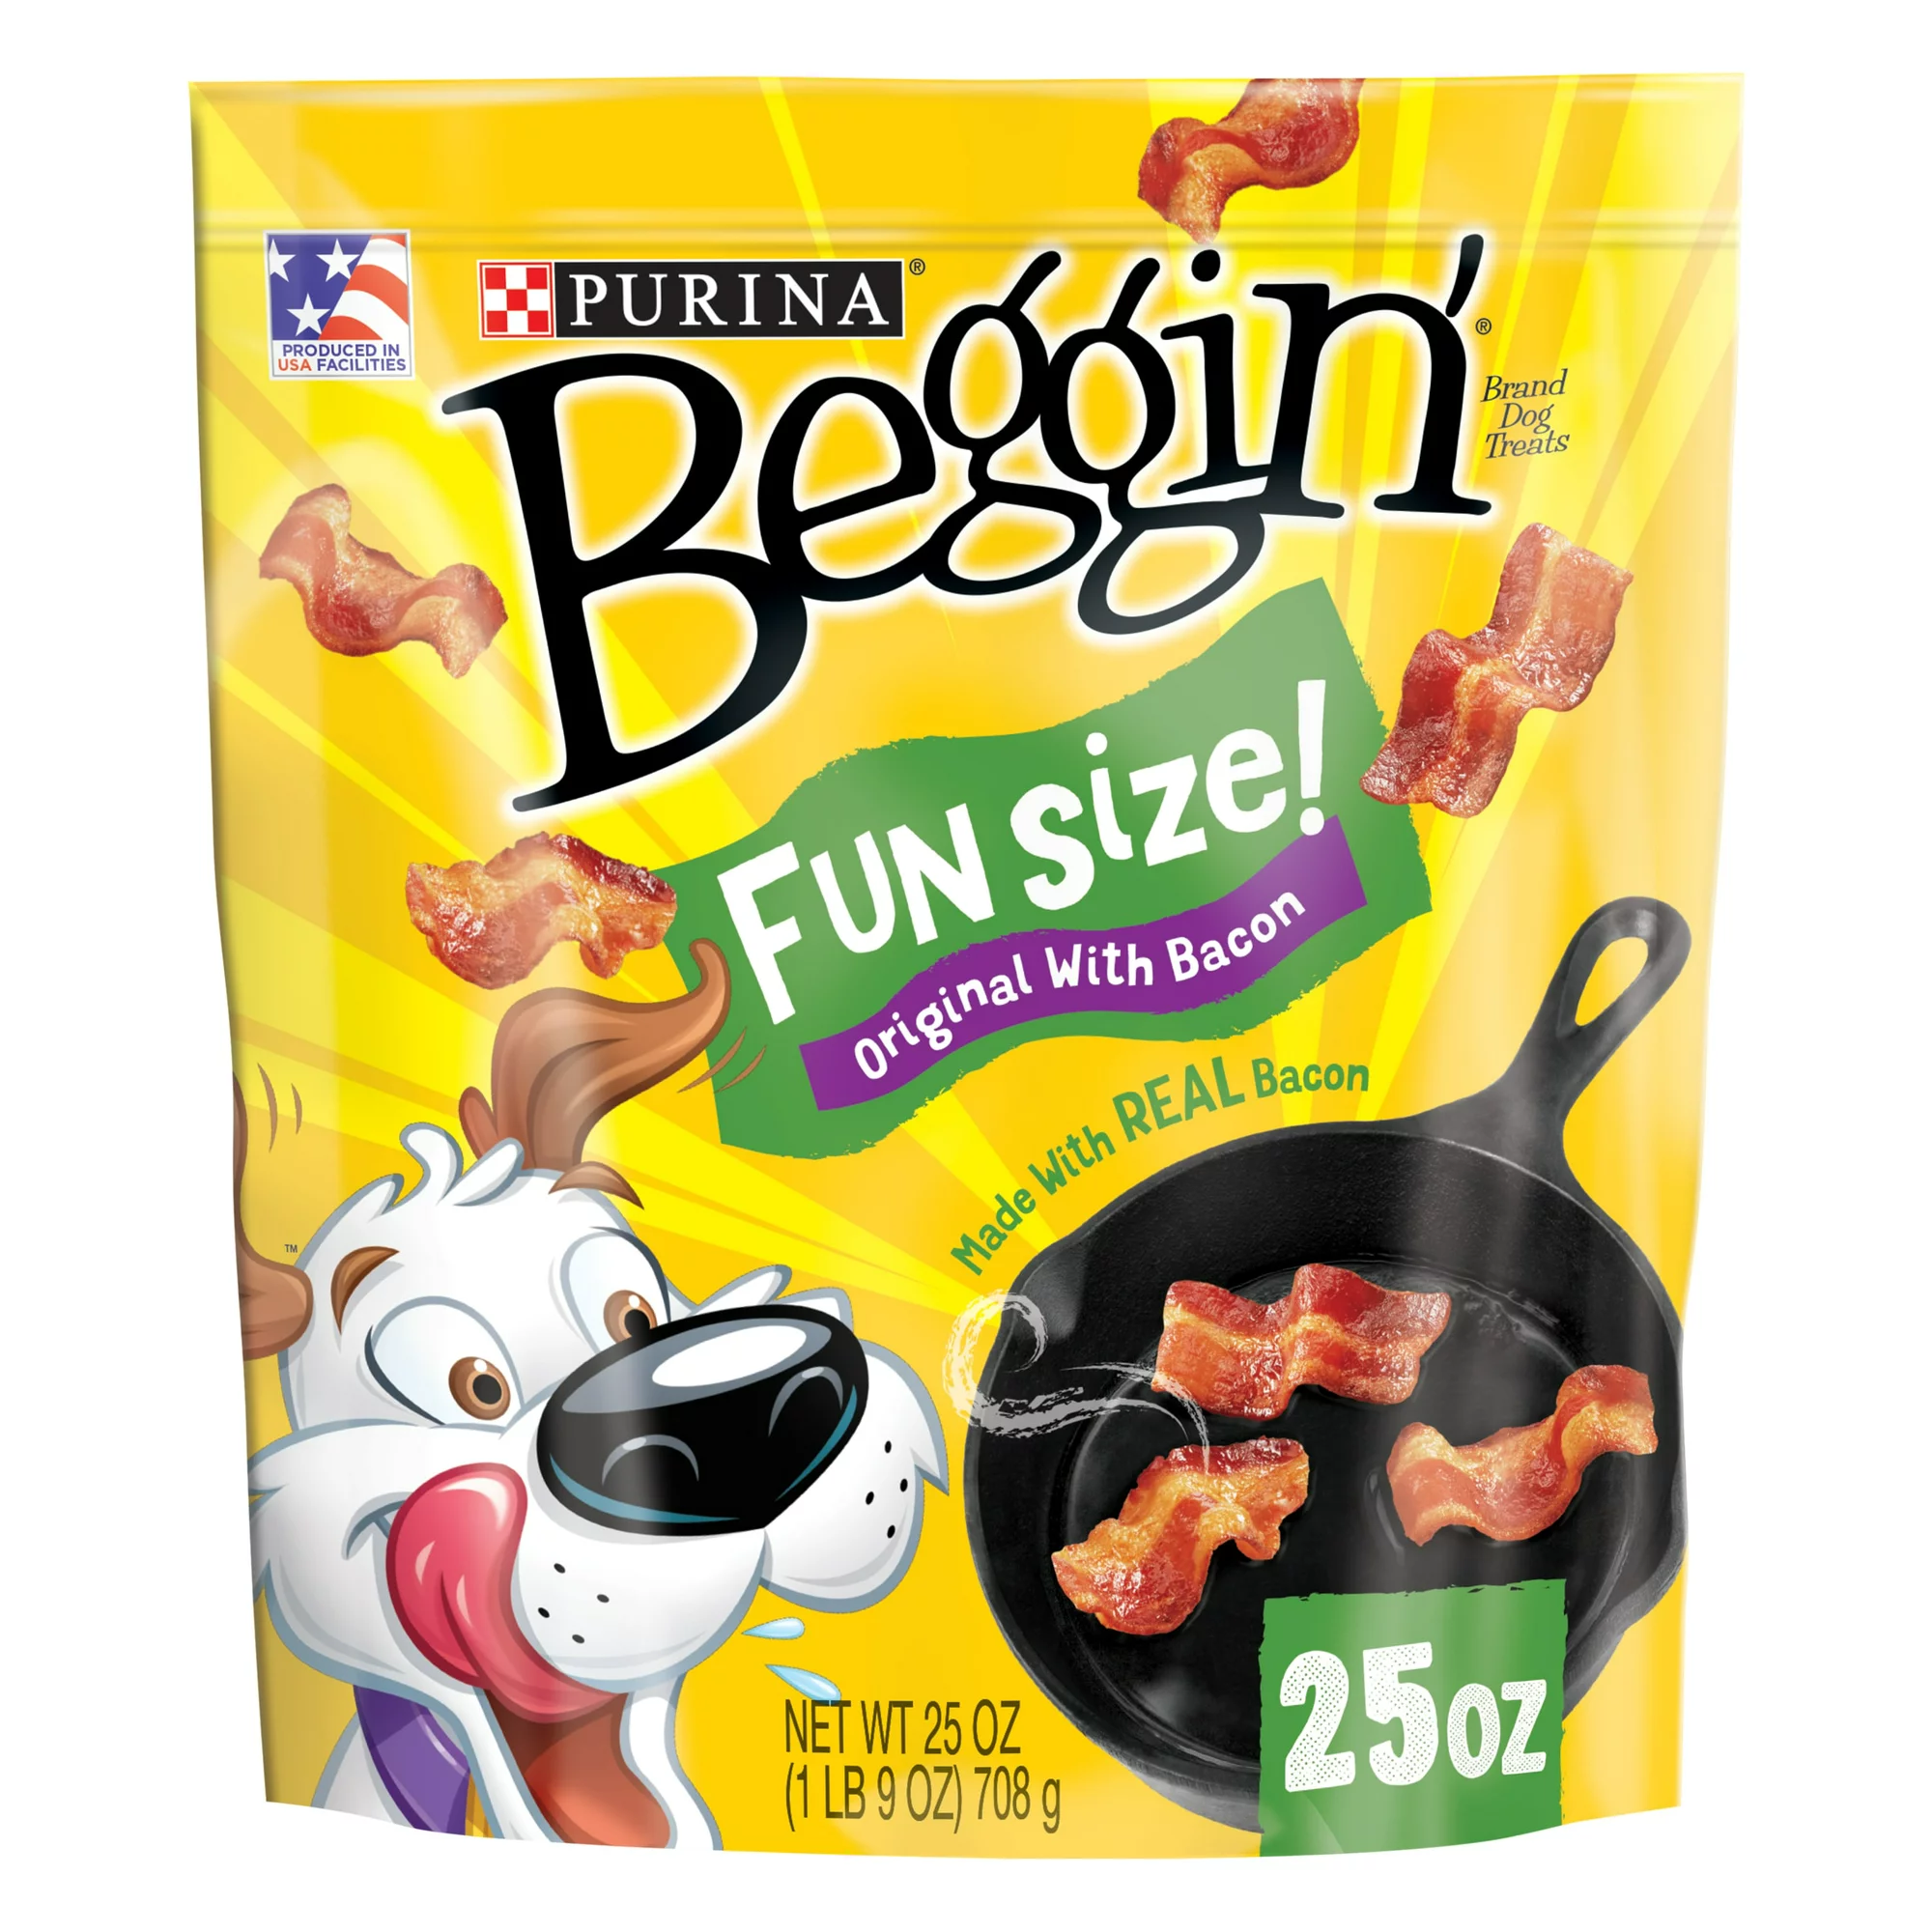 Purina Beggin Real Meat Bacon Treats for Dogs 25 oz Pouch 886c2a1b 7660 423d 8b30 537f5b2bdc44.862cf69f6d236c6bf2d549194fb2568a